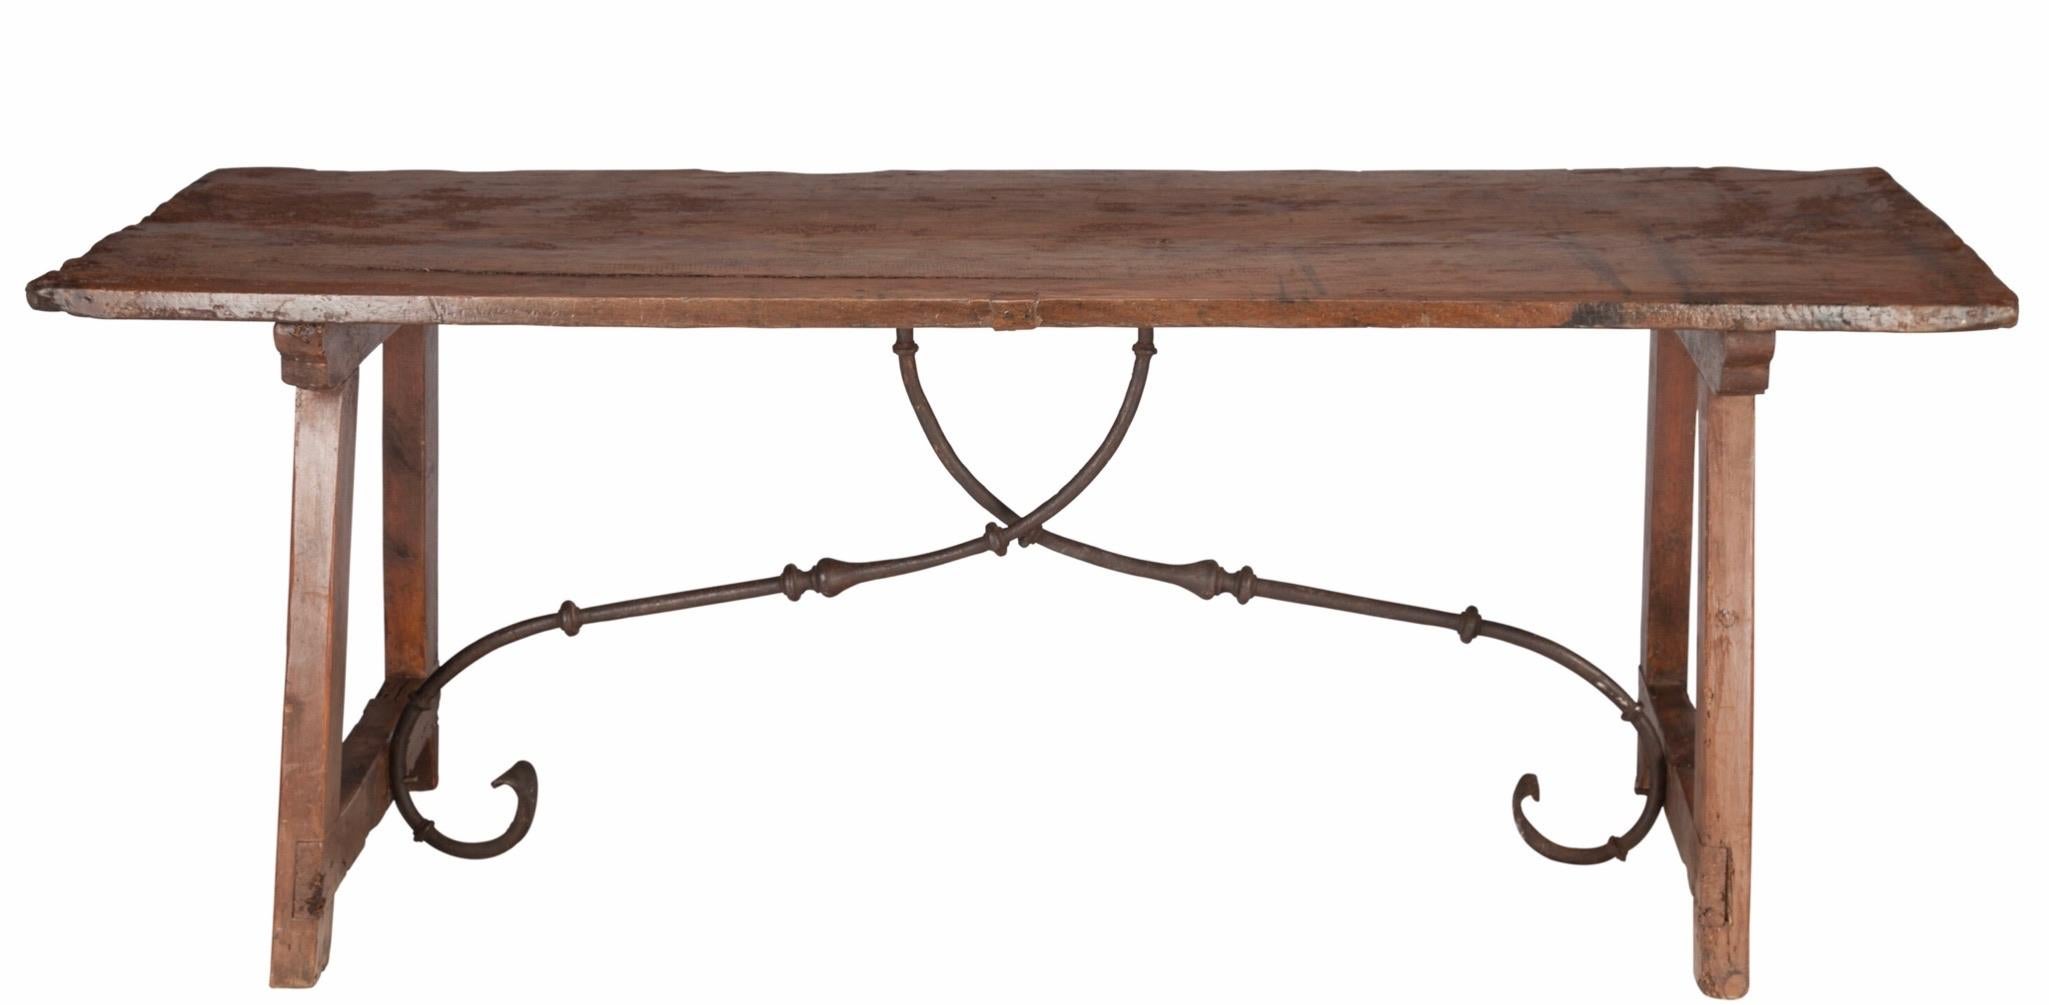 There is no mistaking the style and sophisticated design of this exquisite and authentic antique Spanish refectory table, from the last quarter of the 17th century to the first quarter of the 18th century. 17th-18th century. Base stretcher legs